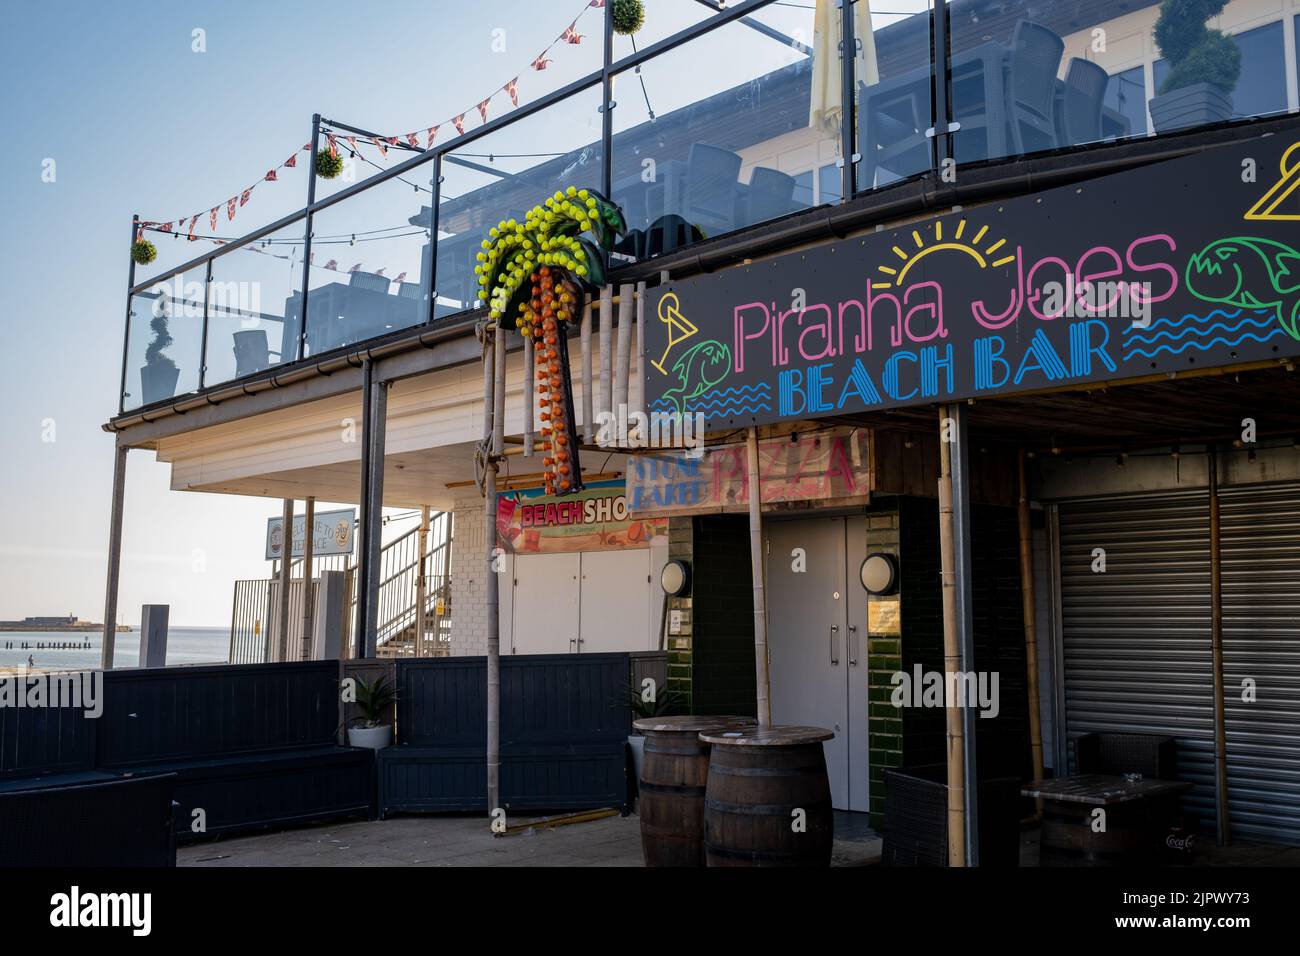 Lowestoft, Suffolk, UK – August 14 2022. The exterior of Piranha Joes Beach Bar on the promenade in the seaside town of Lowestoft on the Suffolk Co Stock Photo